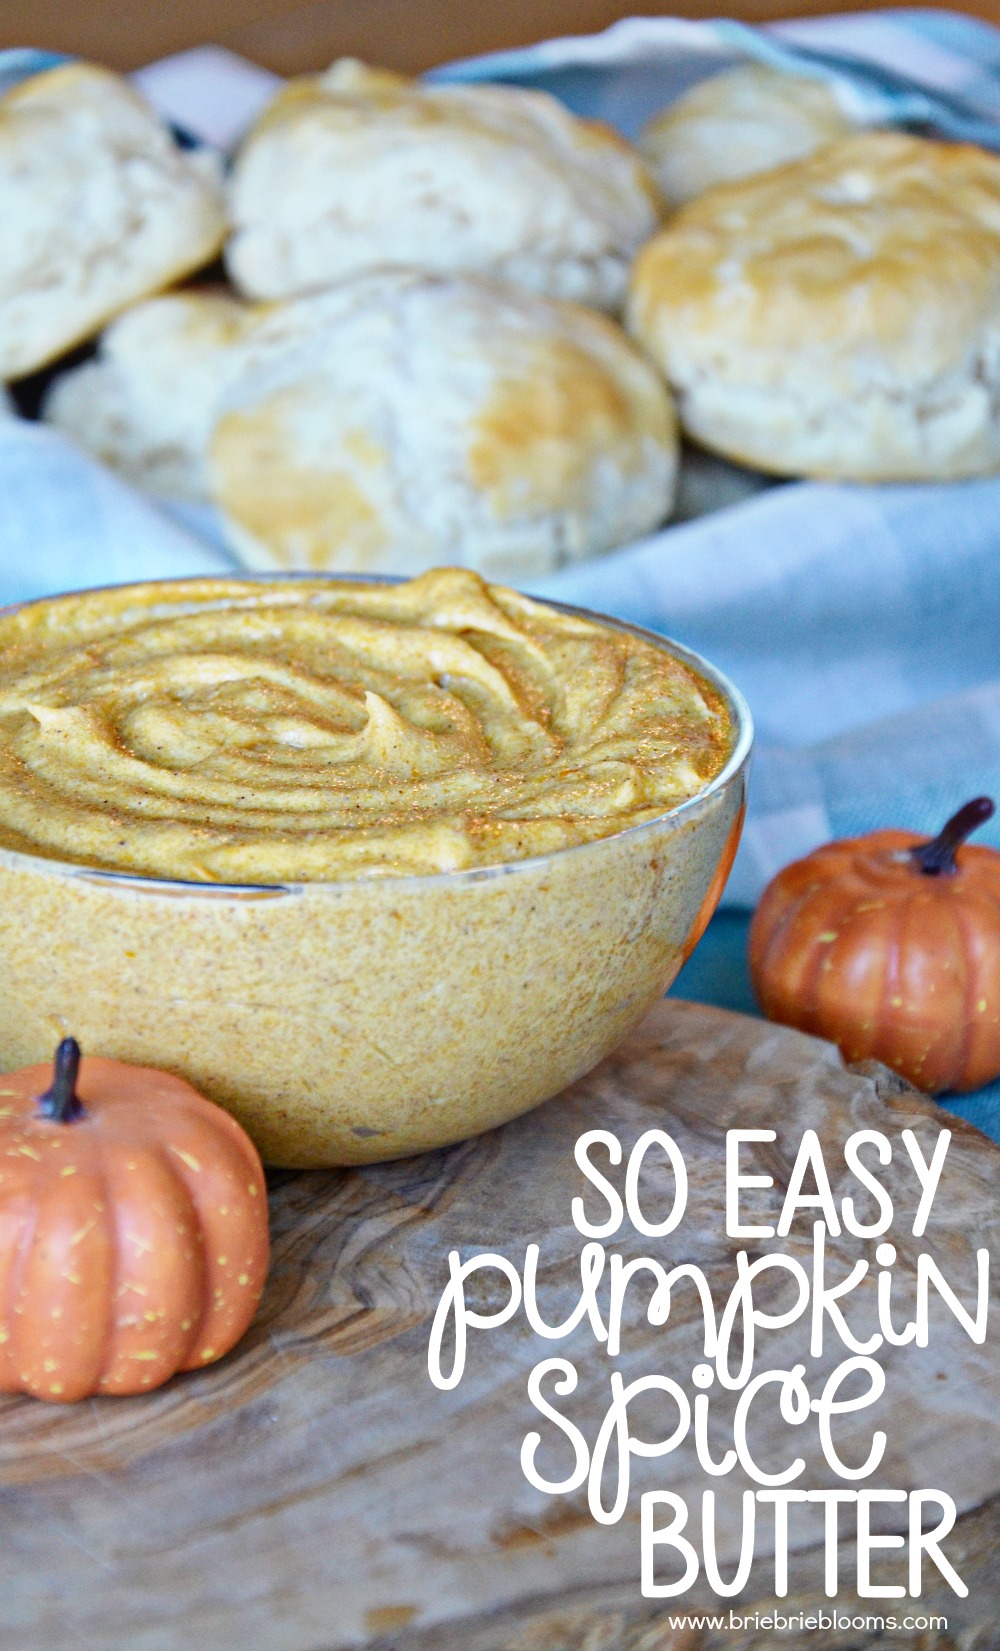 Make this So Easy Pumpkin Spice Butter in just a few minutes to serve with warm biscuits or rolls.